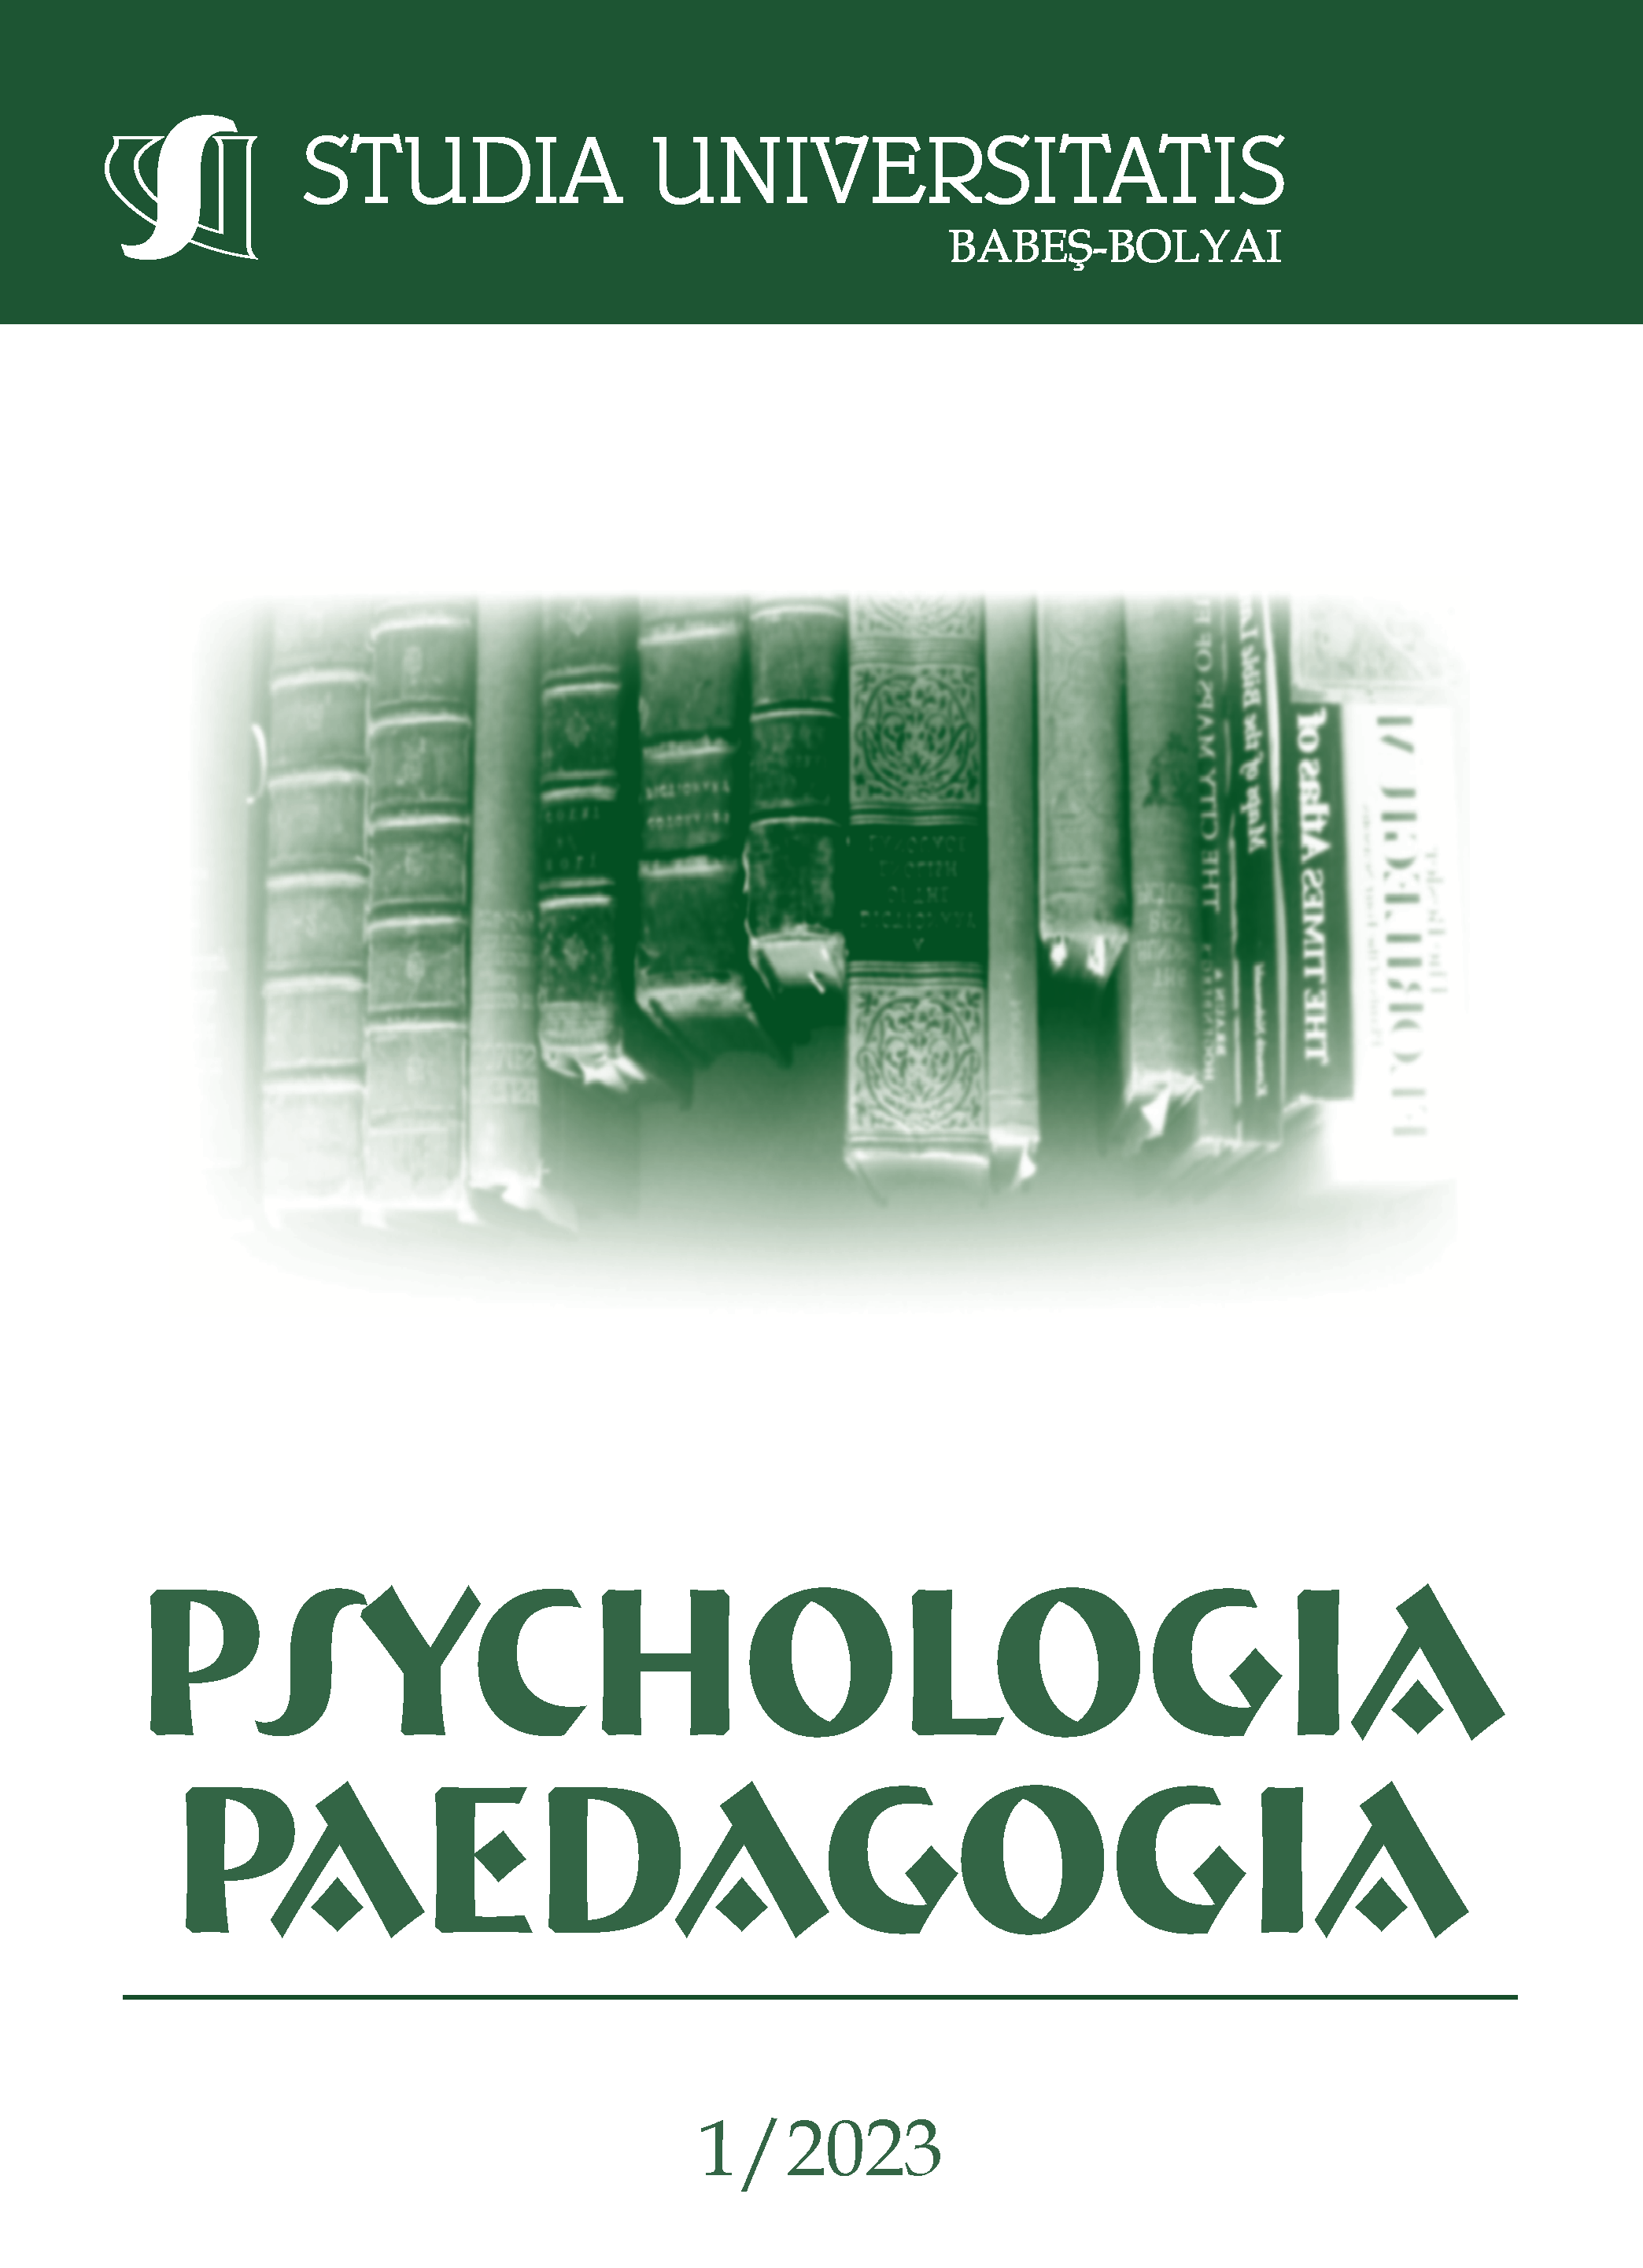 RELATIONSHIPS BETWEEN SMOKING HABITS, SUBJECTIVE HEALTH STATUS, LIFE SATISFACTION, AND HAPPINESS AMONG THE POLICE OFFICERS OF A HUNGARIAN REGION Cover Image